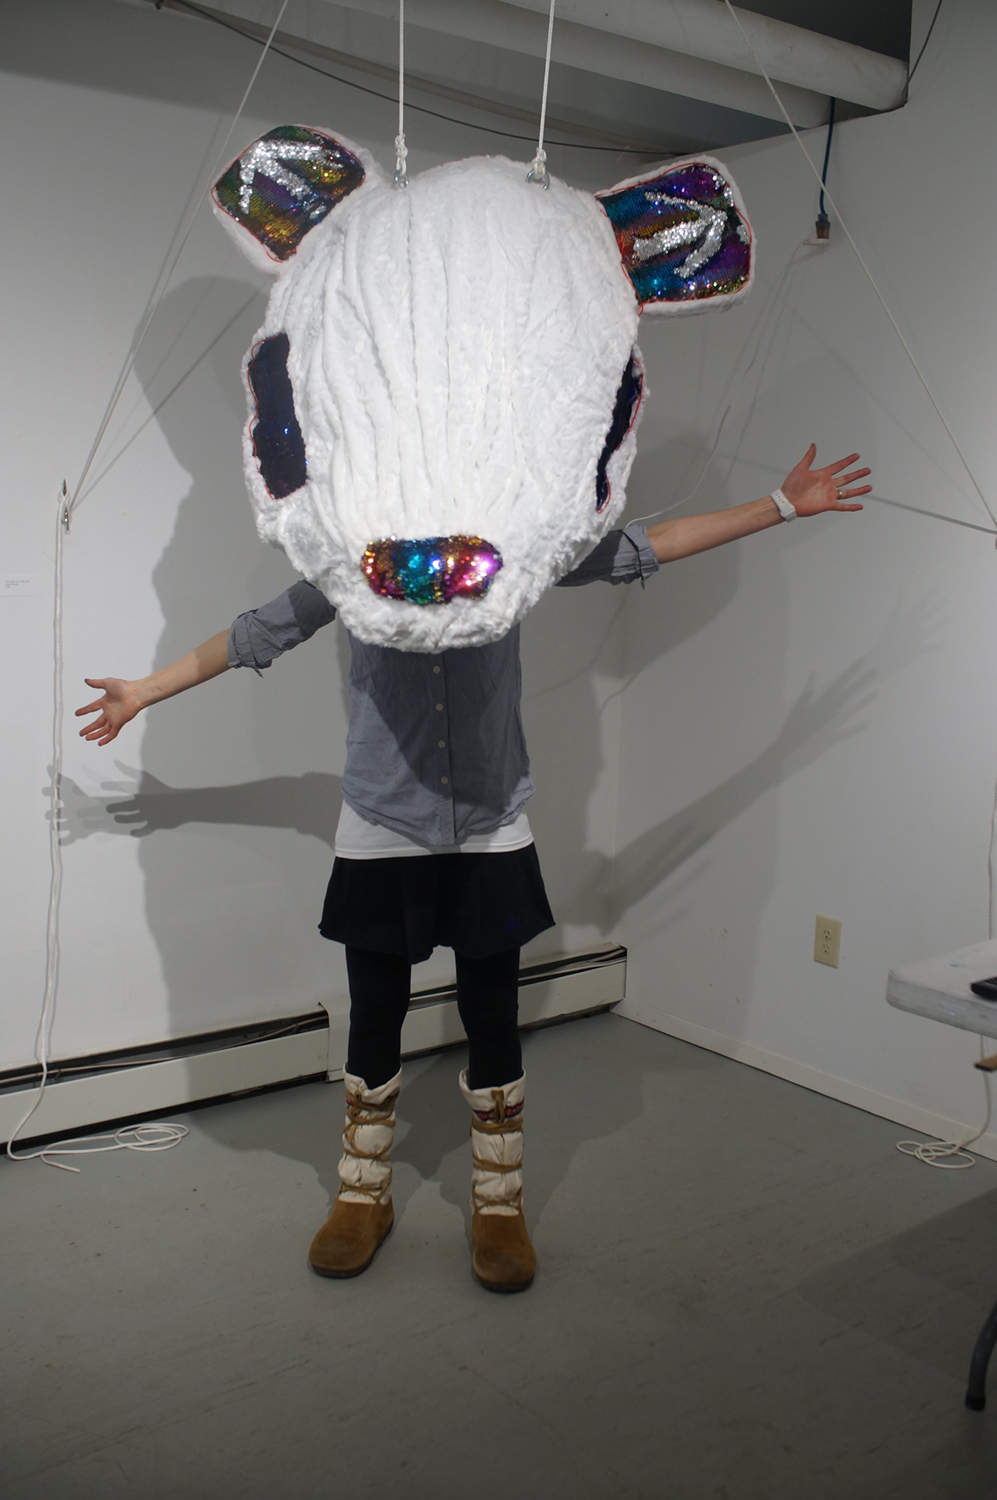 Naomi poses in the large white mouse mask that is the Who Are You? Who Am I? piece of the exhibit. Image courtesy of Naomi Hutchquist